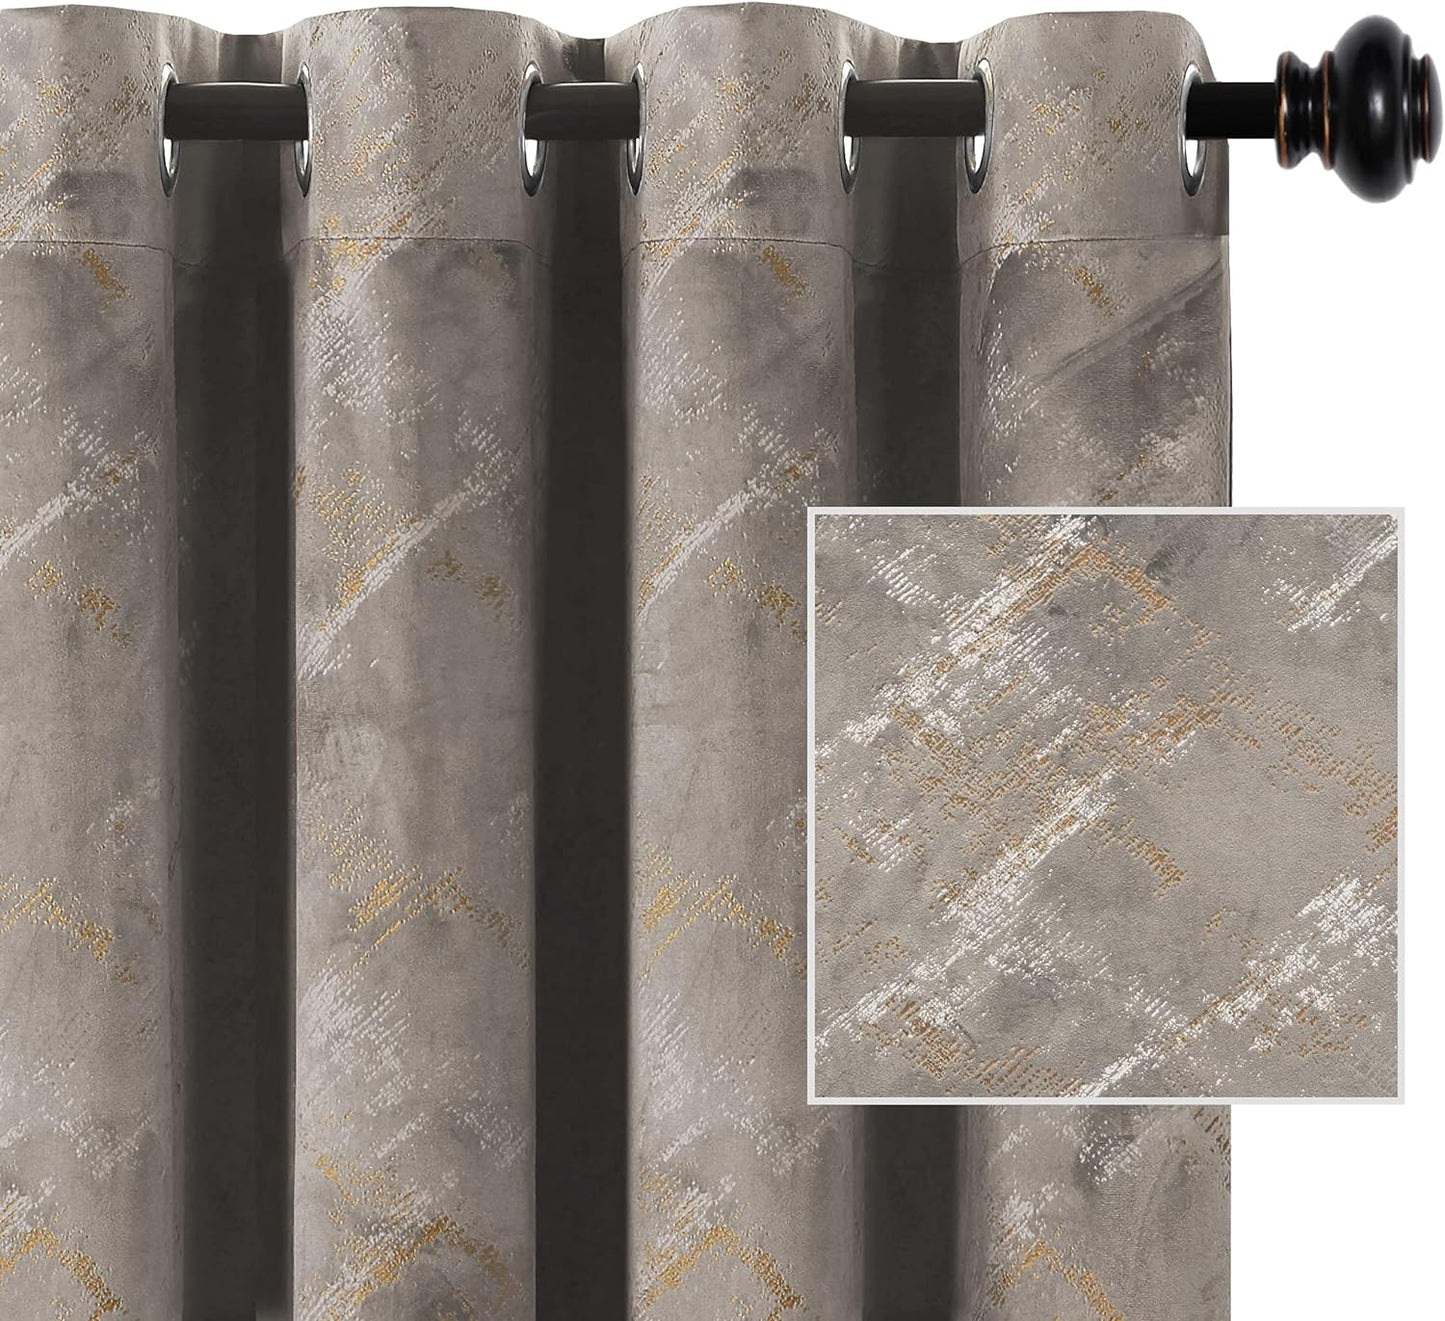 H.VERSAILTEX Luxury Velvet Curtains 84 Inches Long Thermal Insulated Blackout Curtains for Bedroom Foil Print Soft Velvet Grommet Curtain Drapes for Living Room Vintage Home Decor, 2 Panels, Ivory  H.VERSAILTEX Taupe 52"W X 108"L 